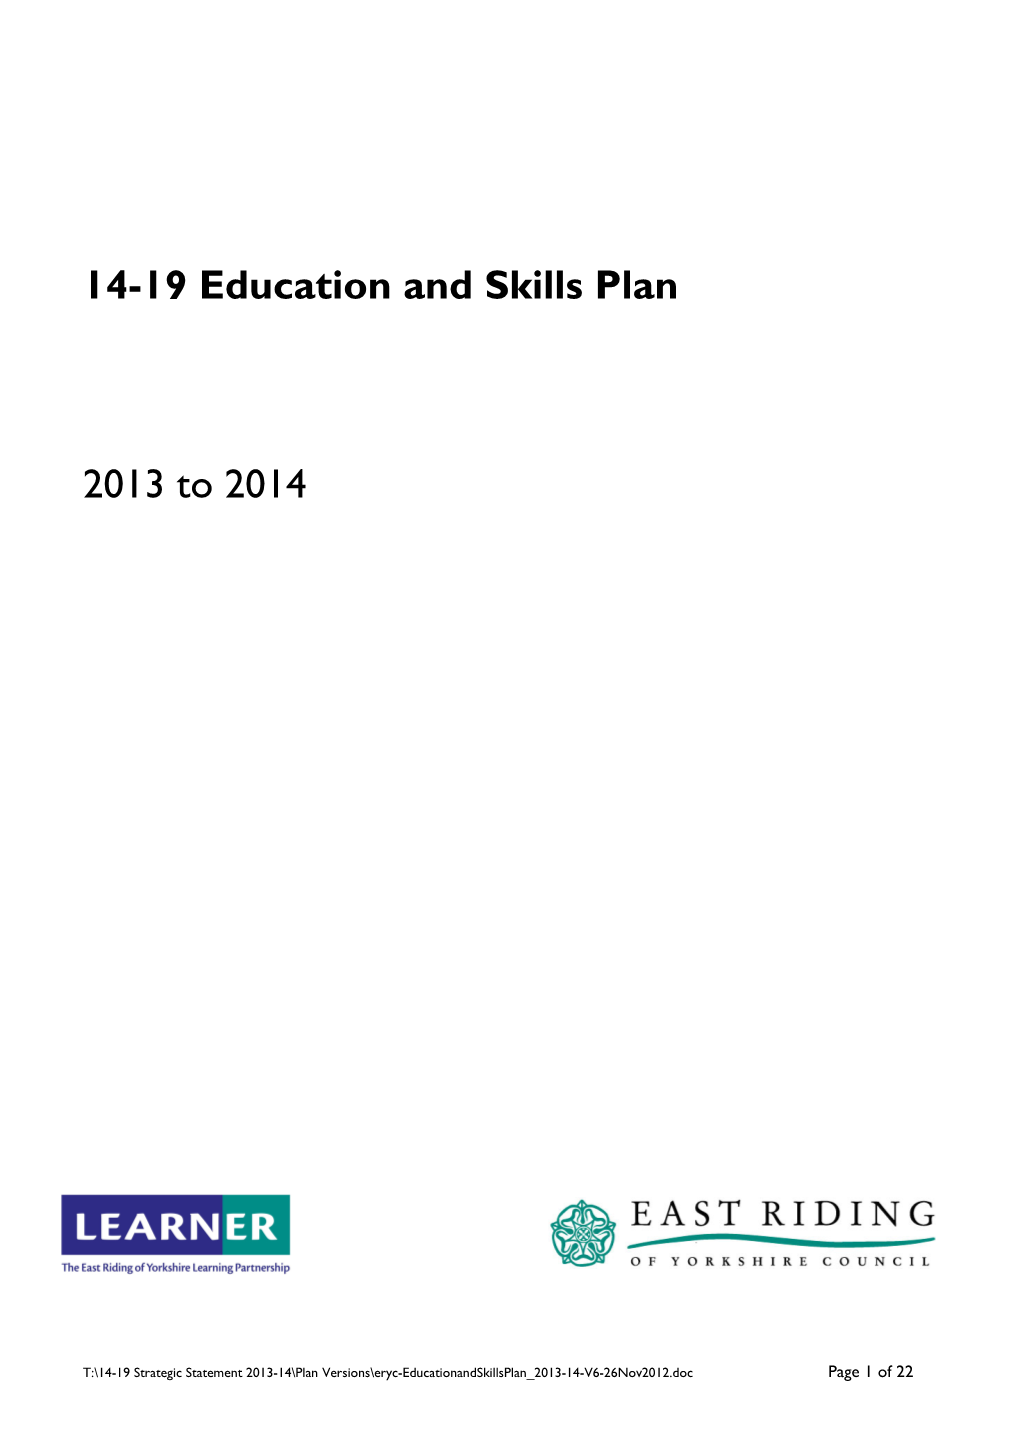 14-19 Education and Training Plan